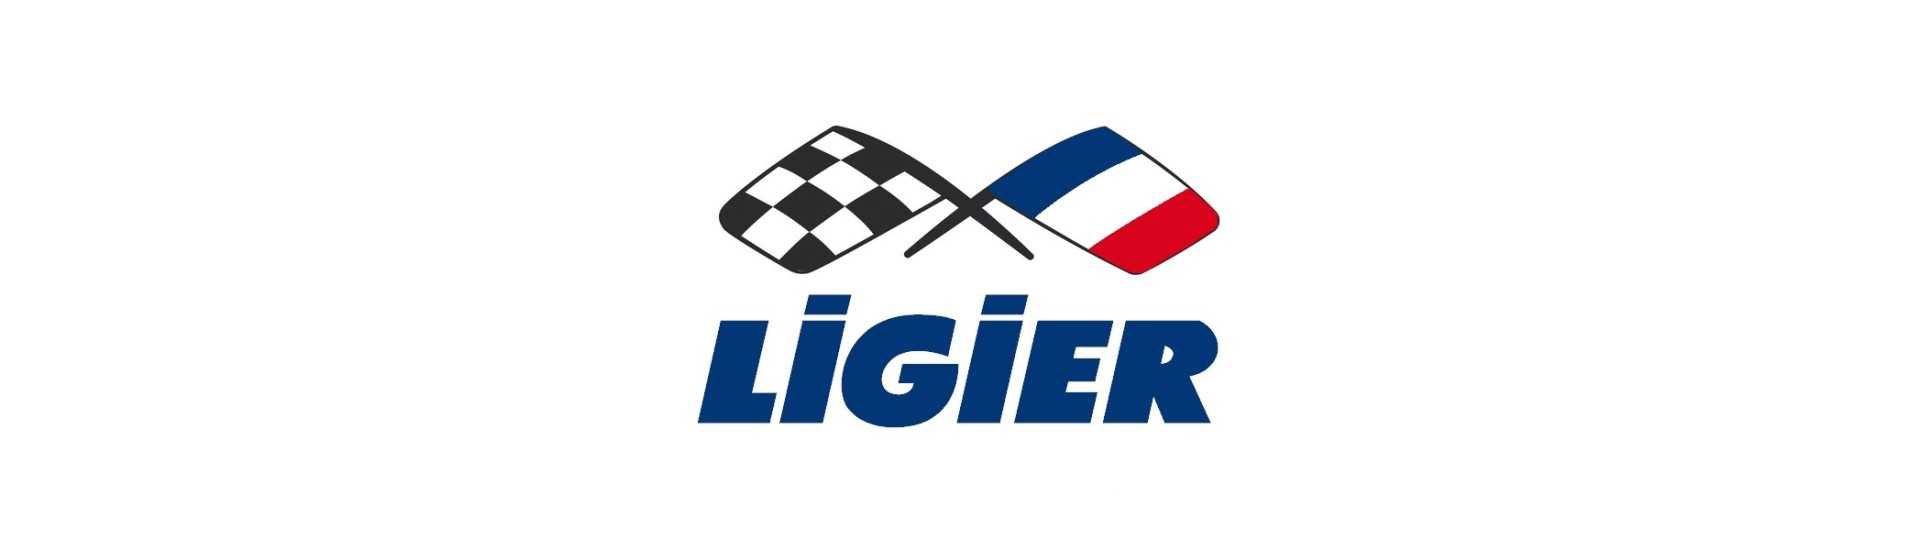 3rd stop fire at best price for car without permit Ligier